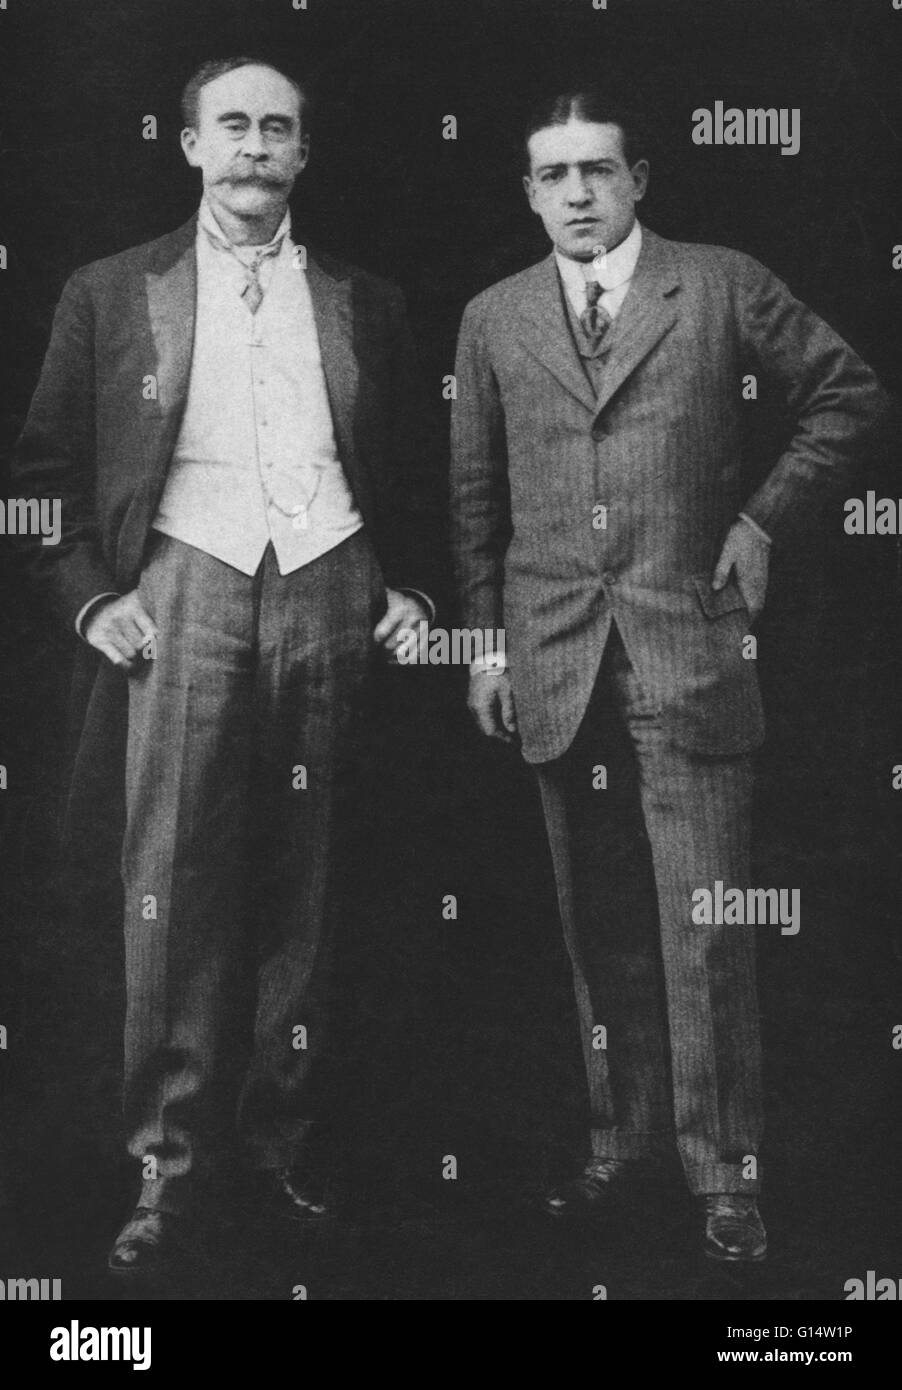 Arctic explorer Robert E. Peary and Antarctic explorer Sir Ernest H.  Shackleton, photographed together in New York City in 1910. Peary claimed  to have been the first to reach the North Pole